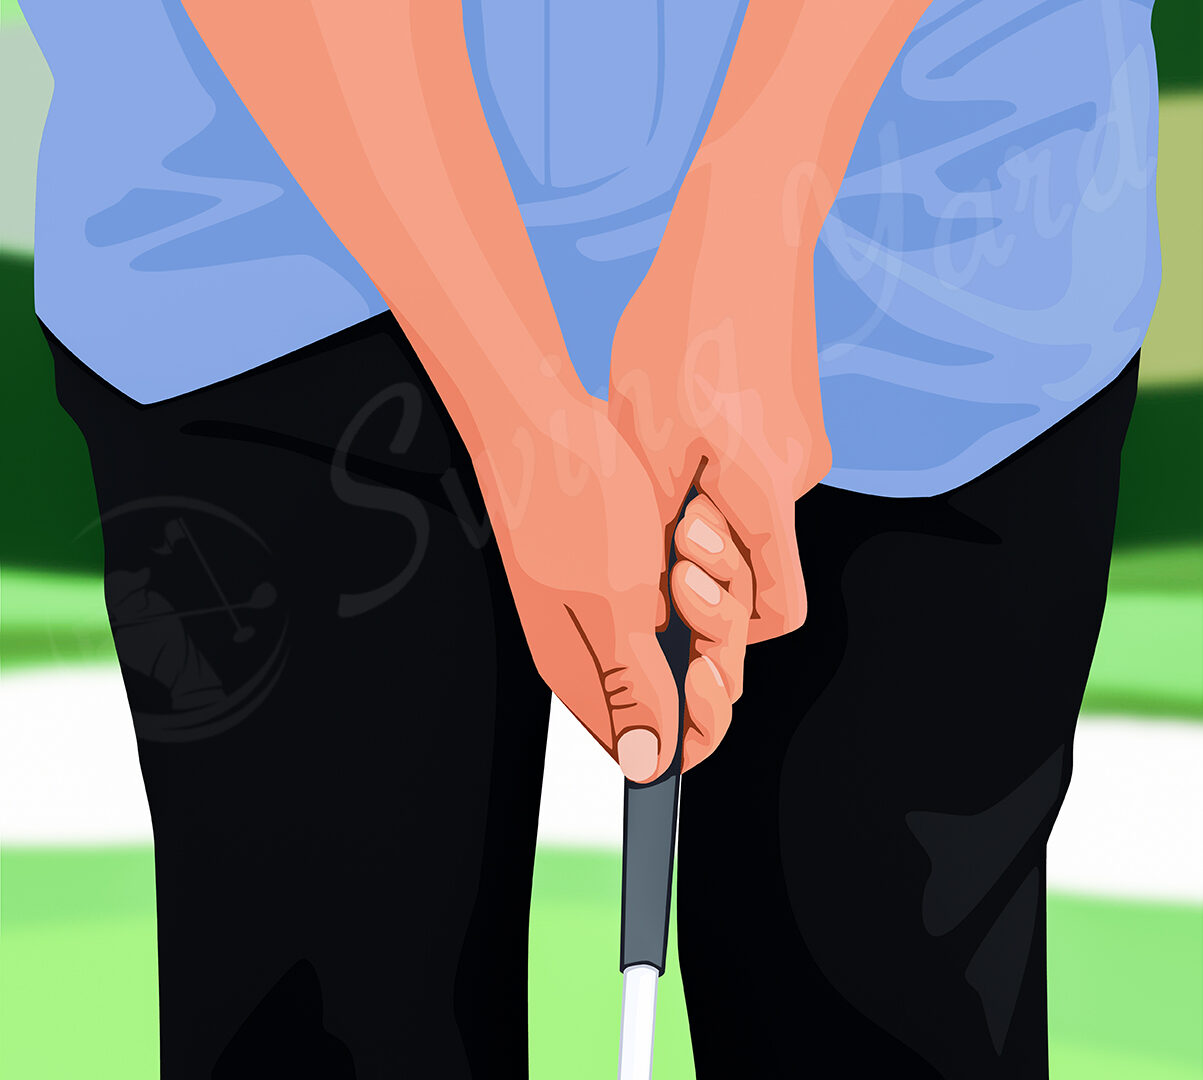 Front on view of the overlap putting grip